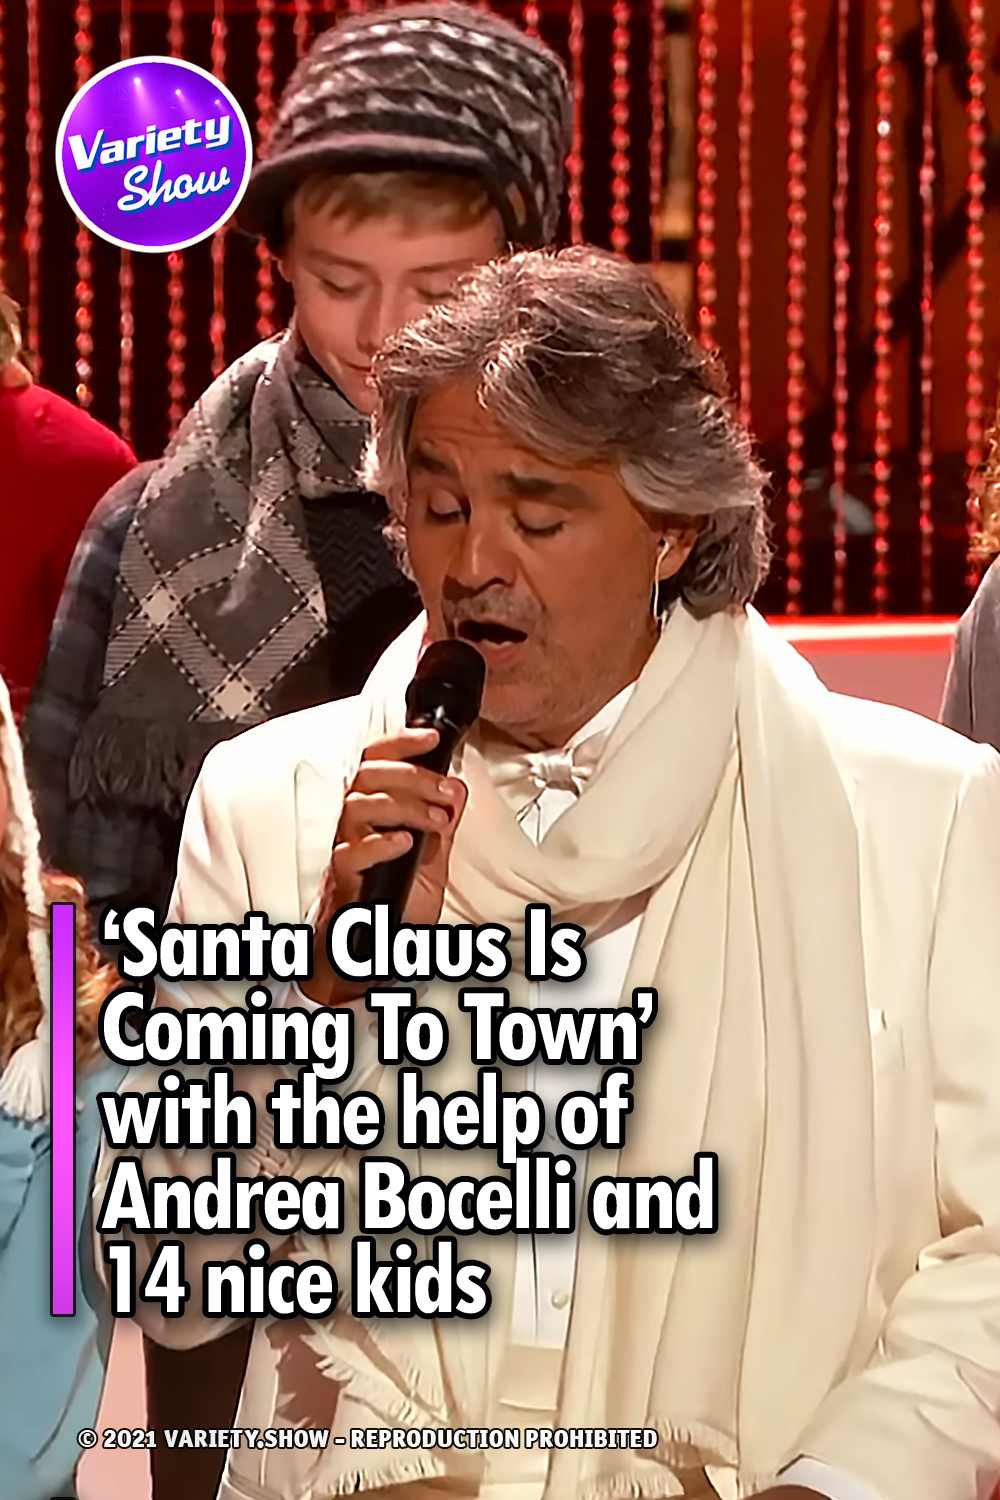 ‘Santa Claus Is Coming To Town’ with the help of Andrea Bocelli and 14 nice kids